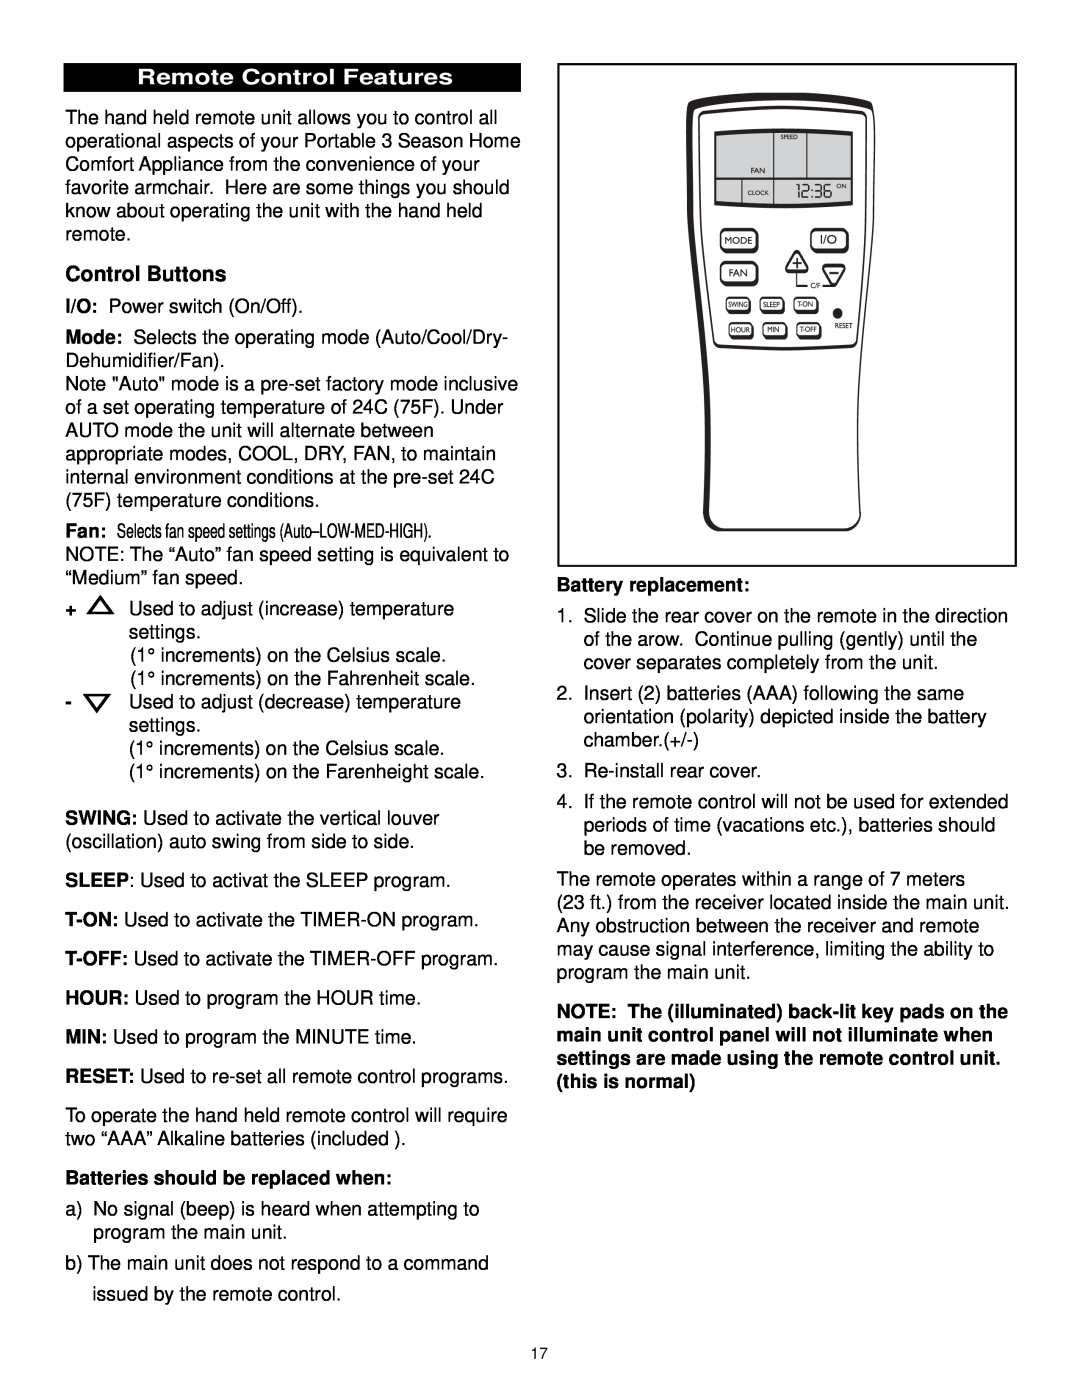 Danby DPAC9030 manual Remote Control Features, Control Buttons, Batteries should be replaced when, Battery replacement 